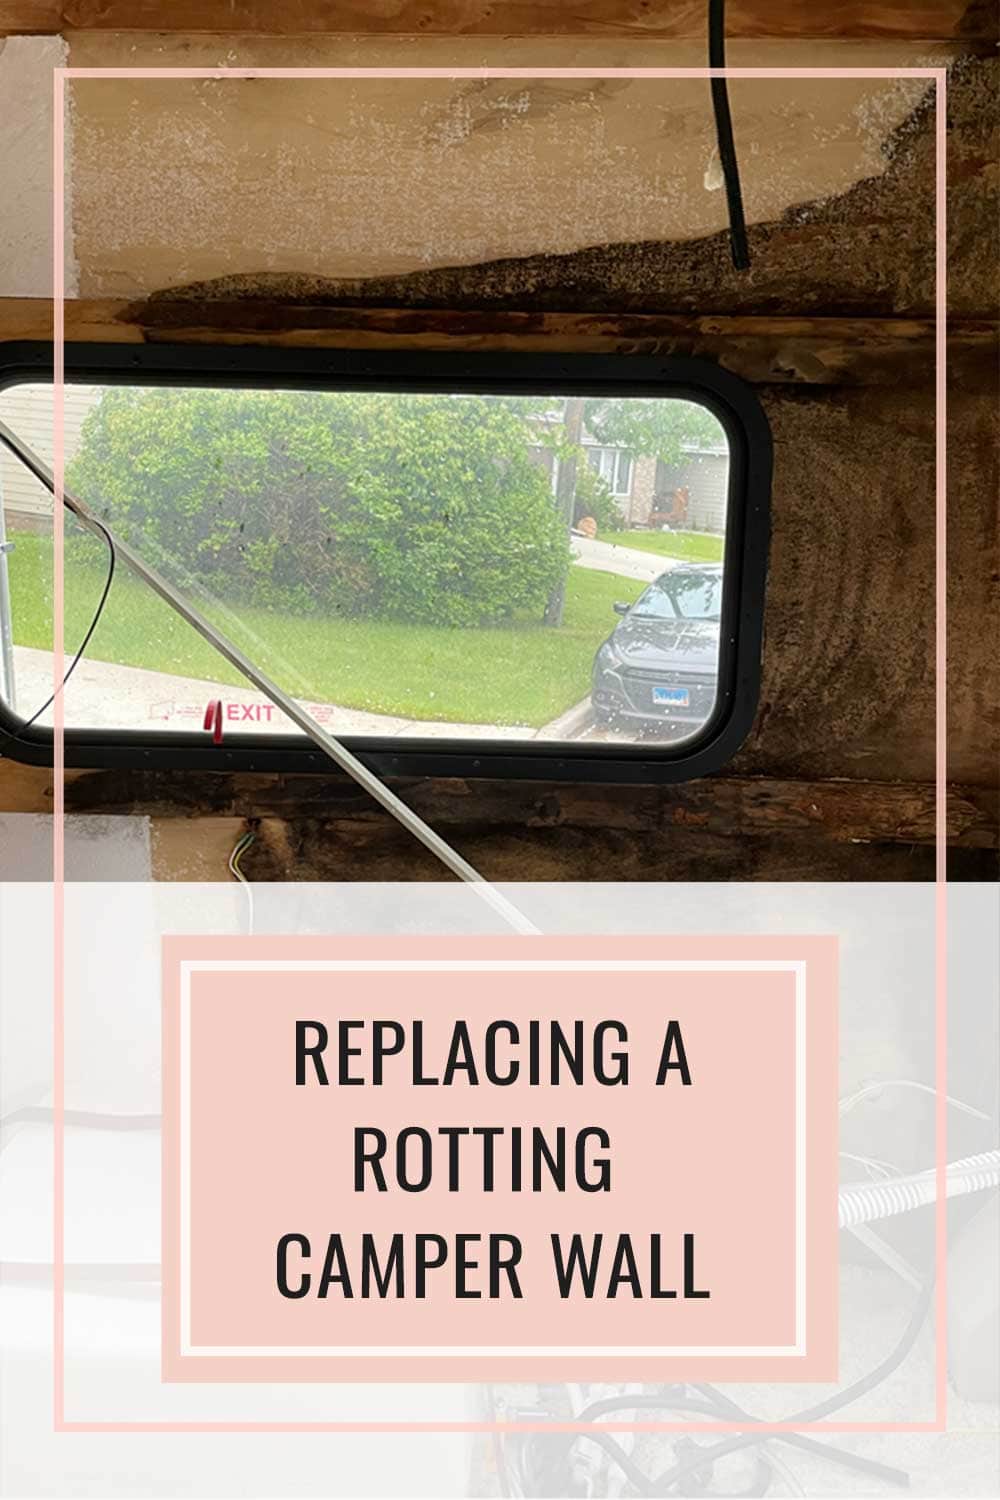 How to Revive Your RV: Fix Delamination in Just 5 Easy Steps